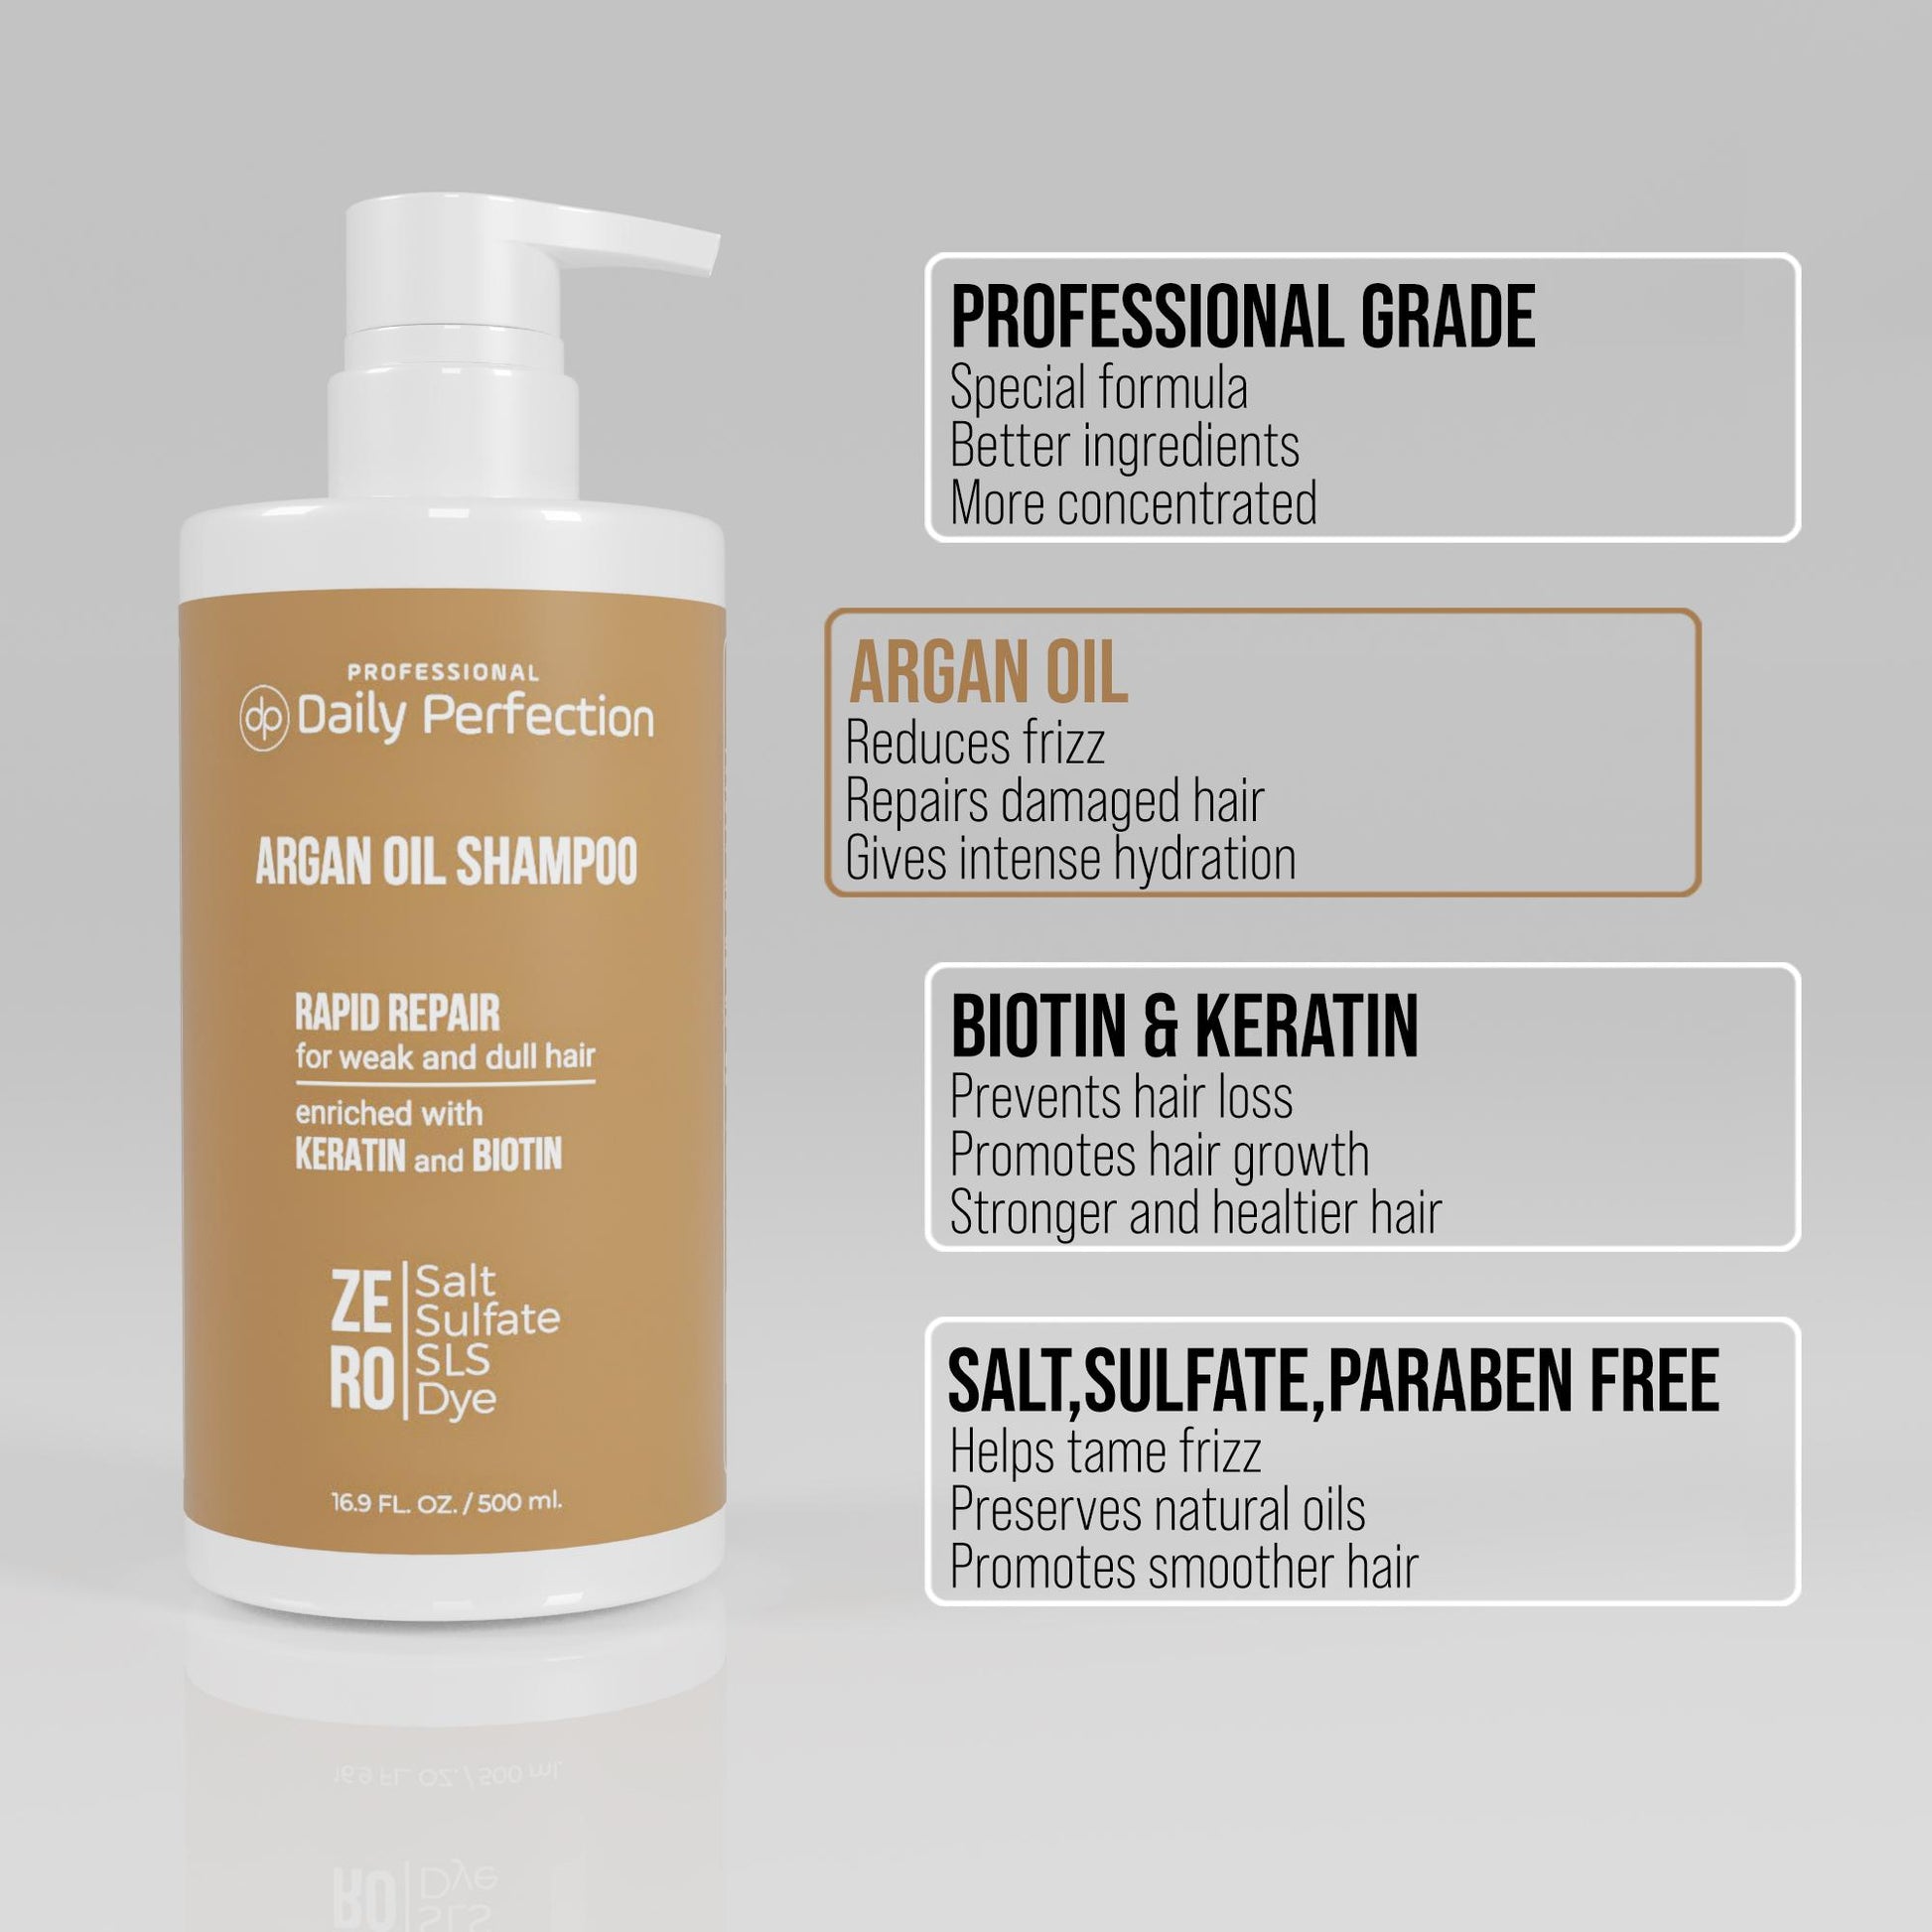 infographic explains the product benefits in four bullet points for Daily Perfection Argan Oil Shampoo